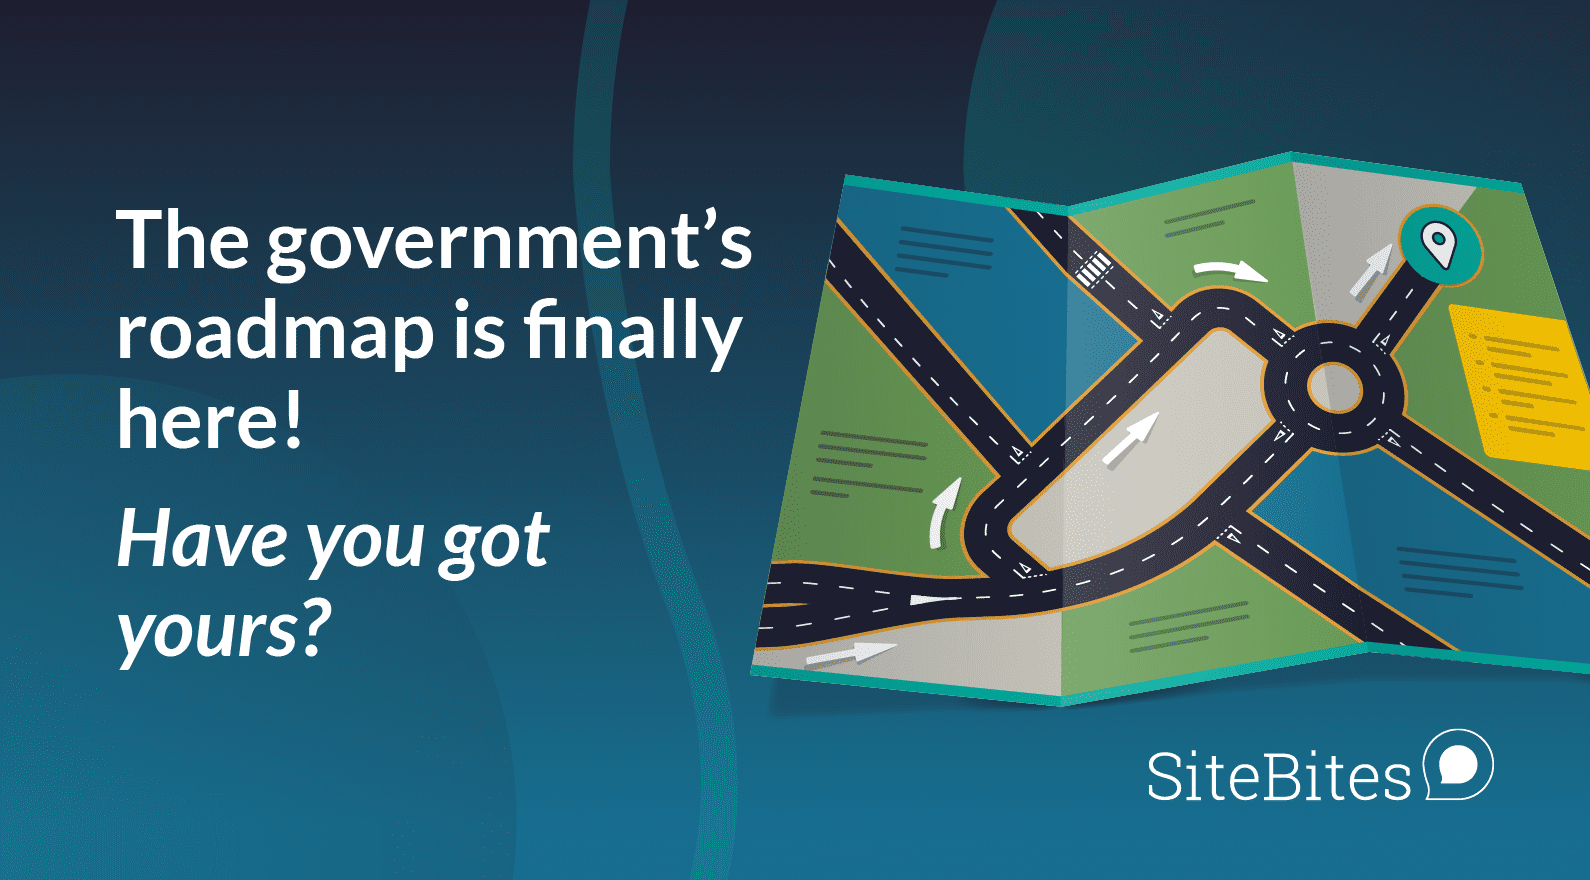 The government’s roadmap is finally here!